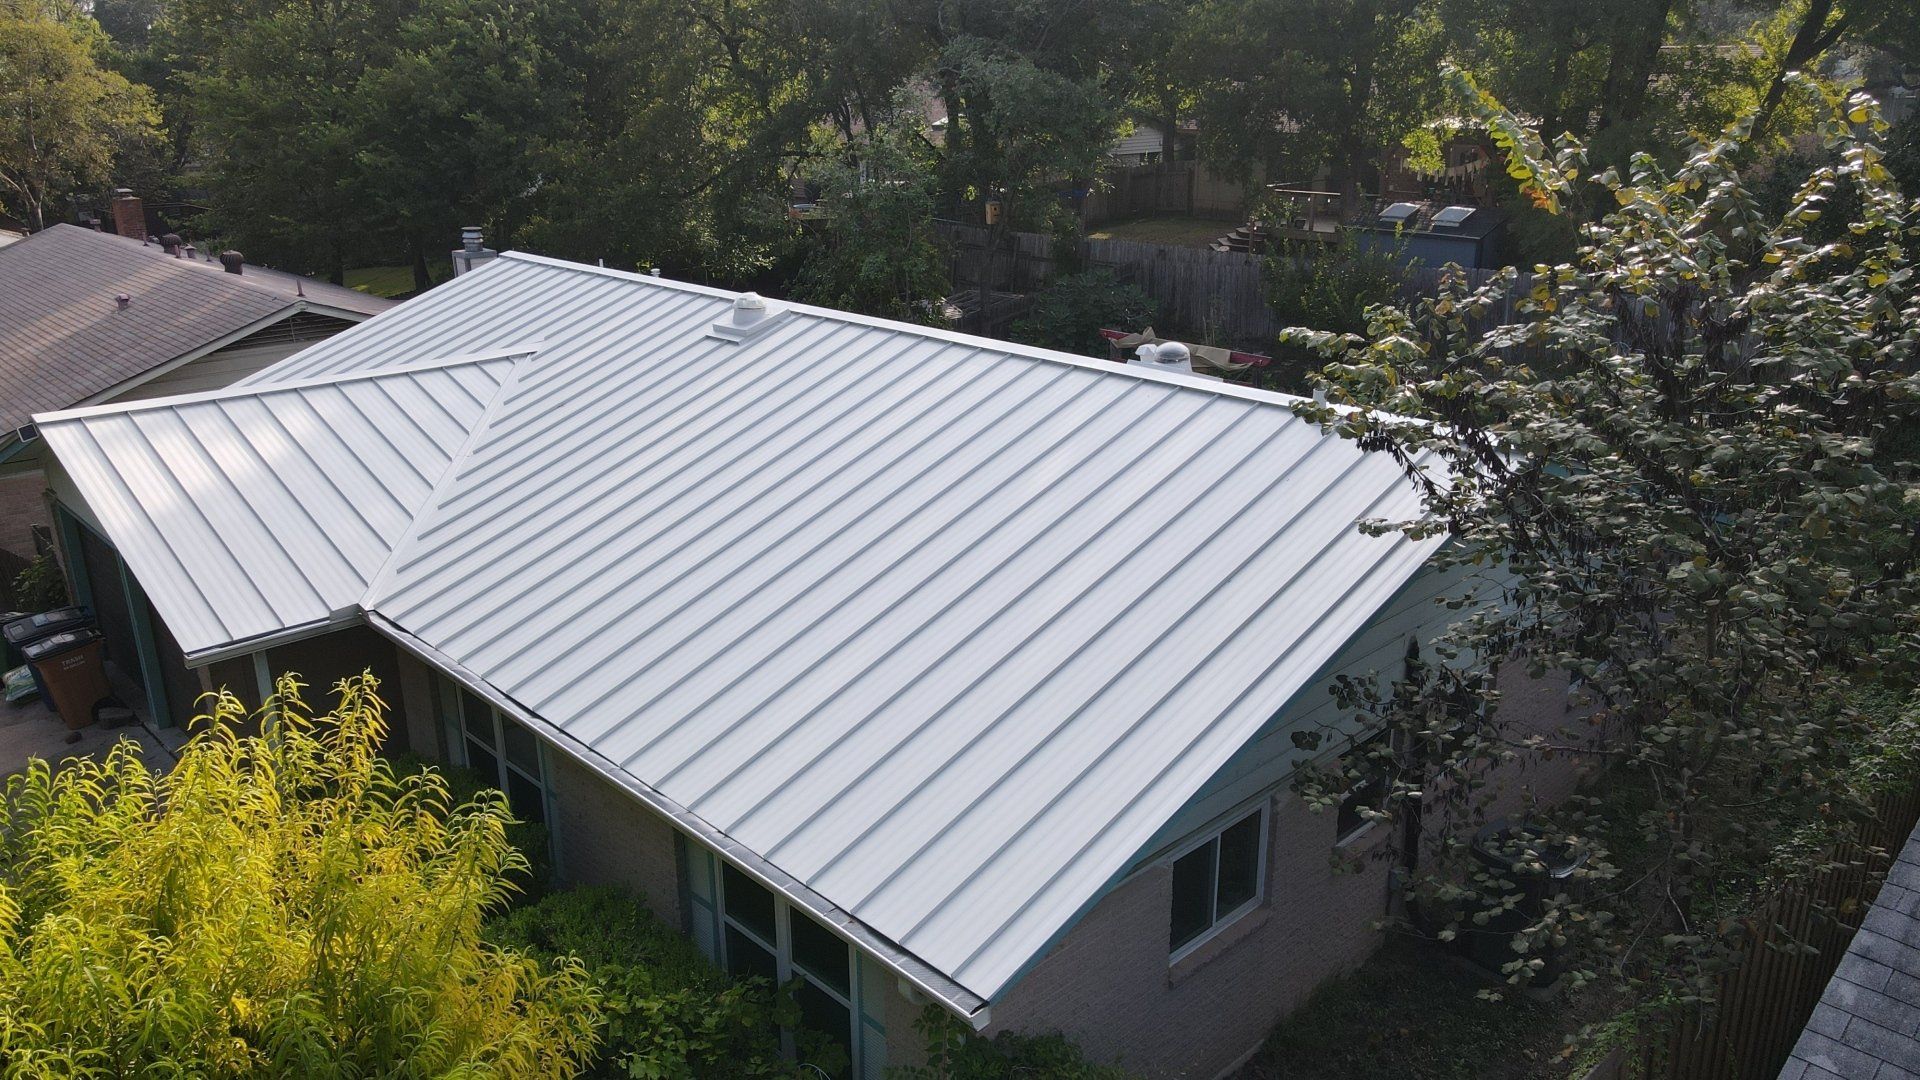 An aerial view of a house with a metal roof surrounded by trees.